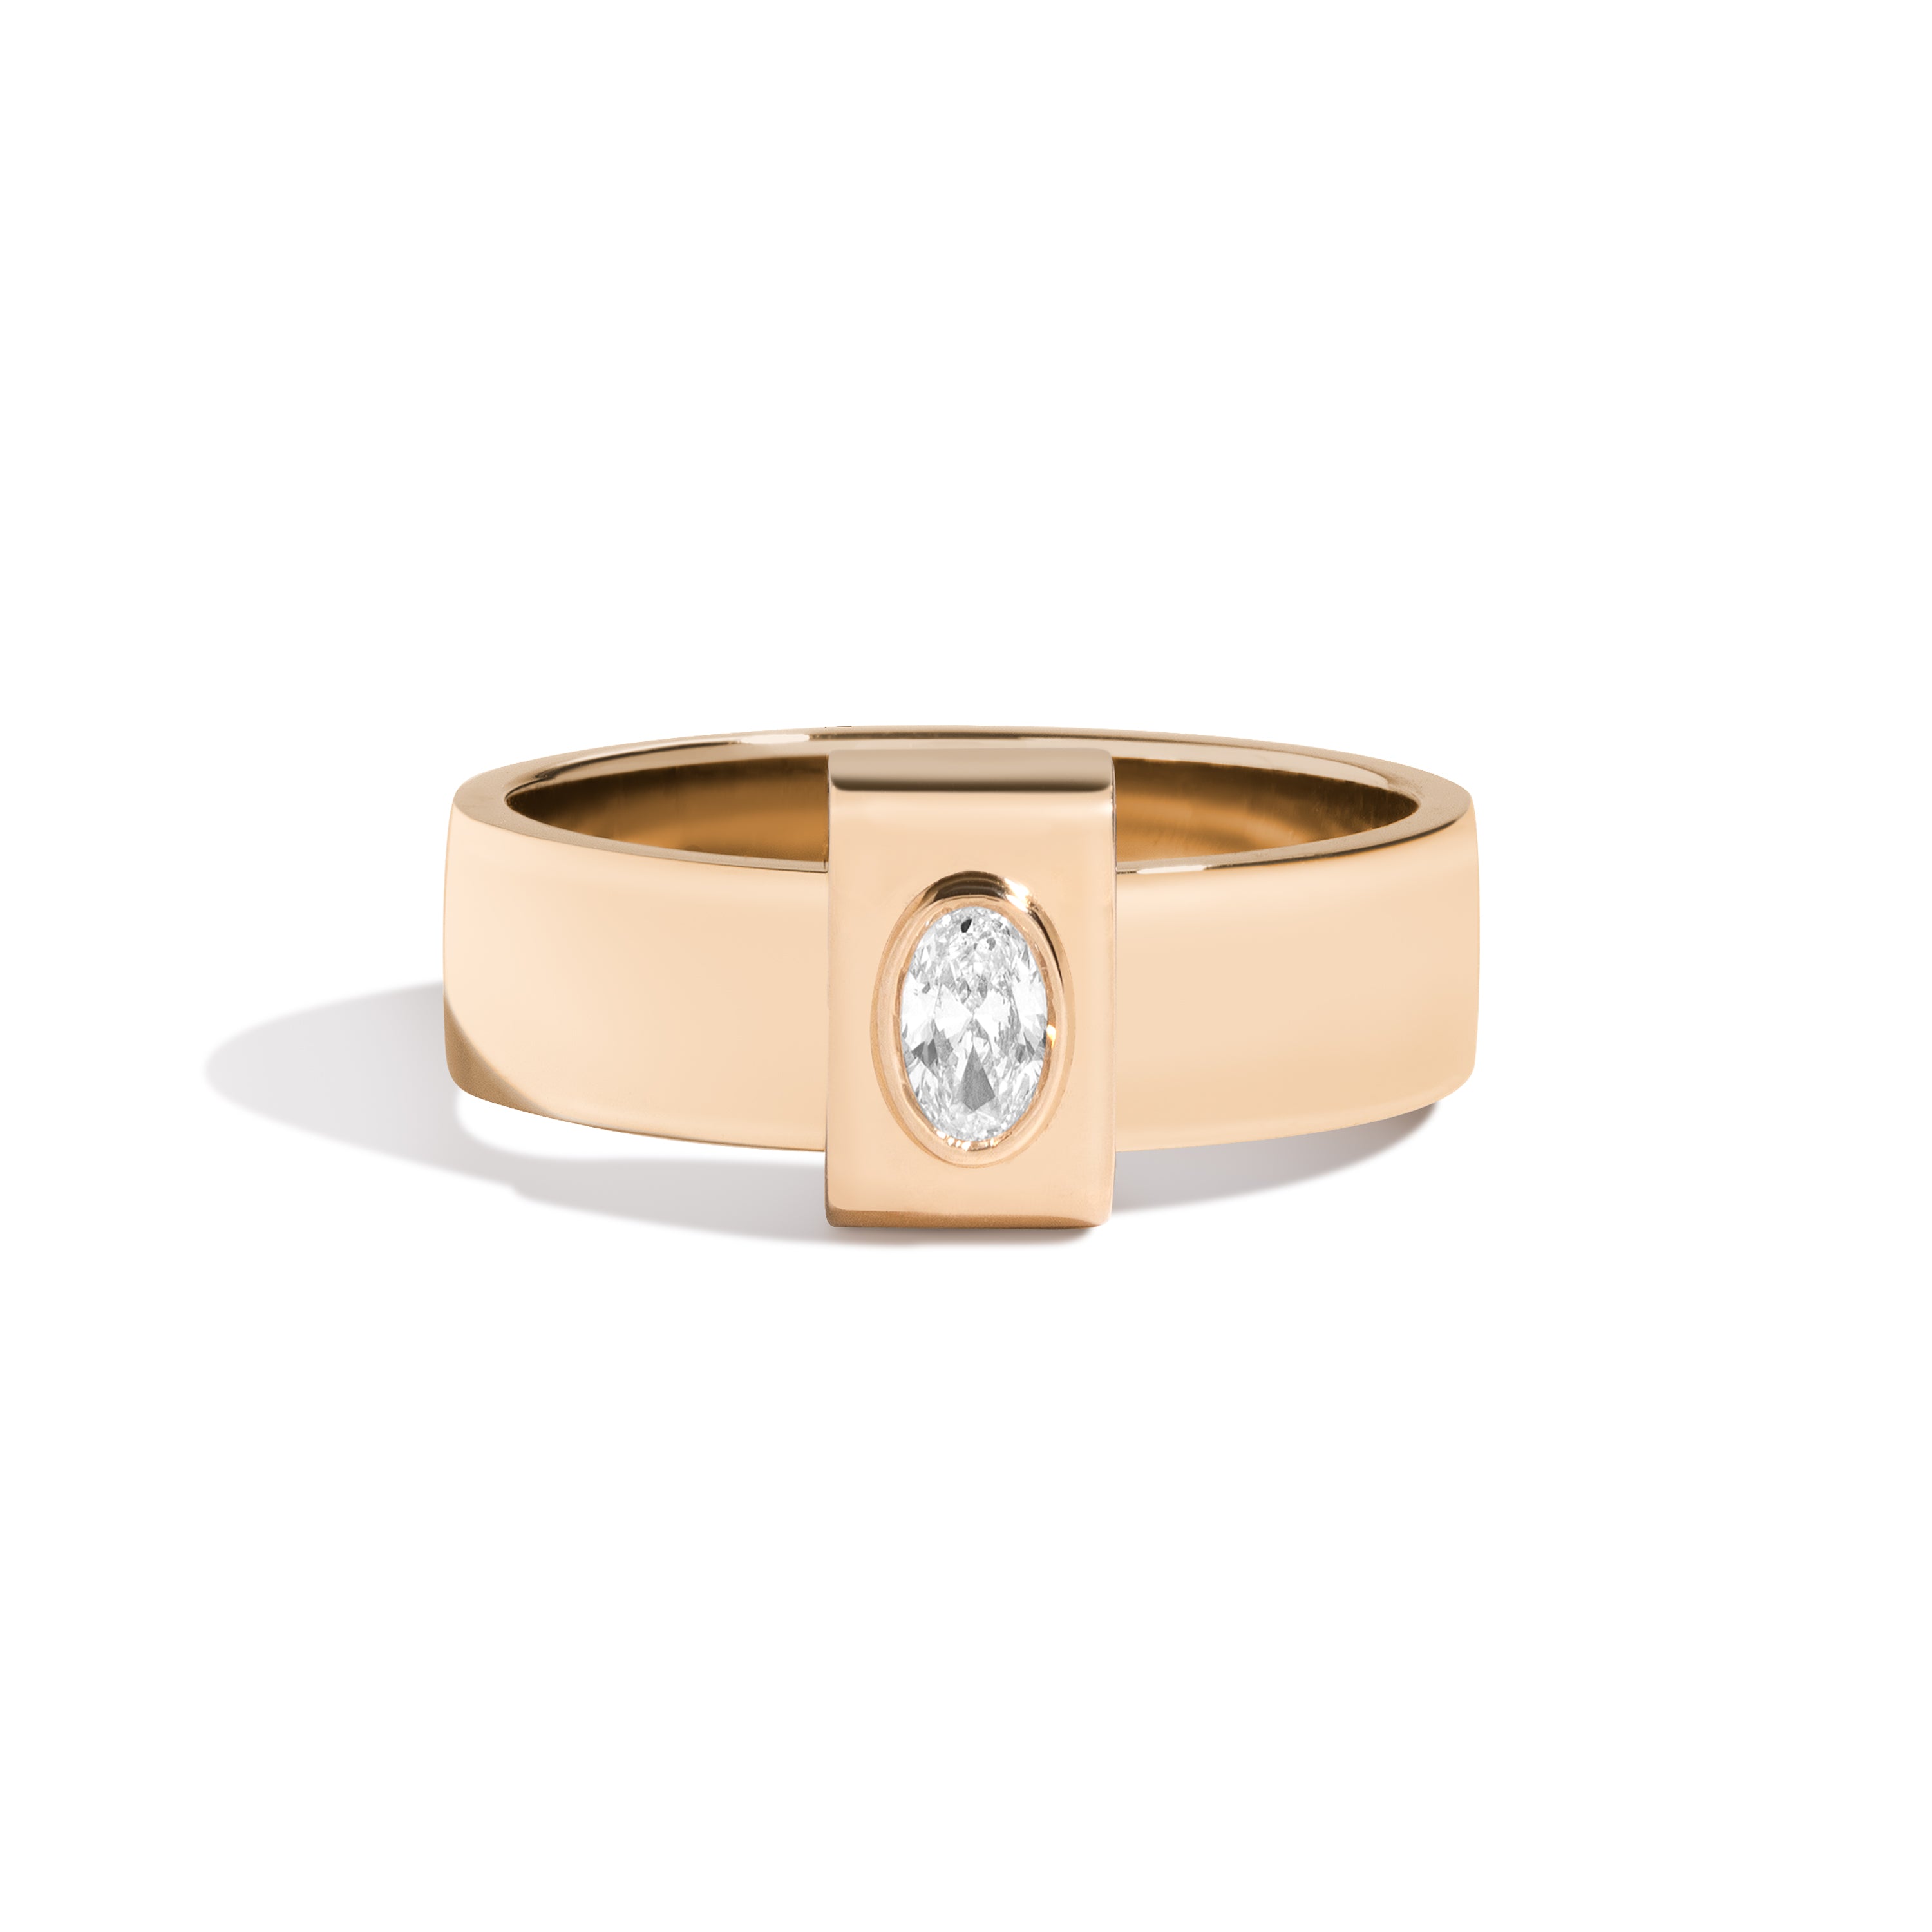 Shahla Karimi Signature 14K Yellow Gold 6mm Band With Oval Wrap